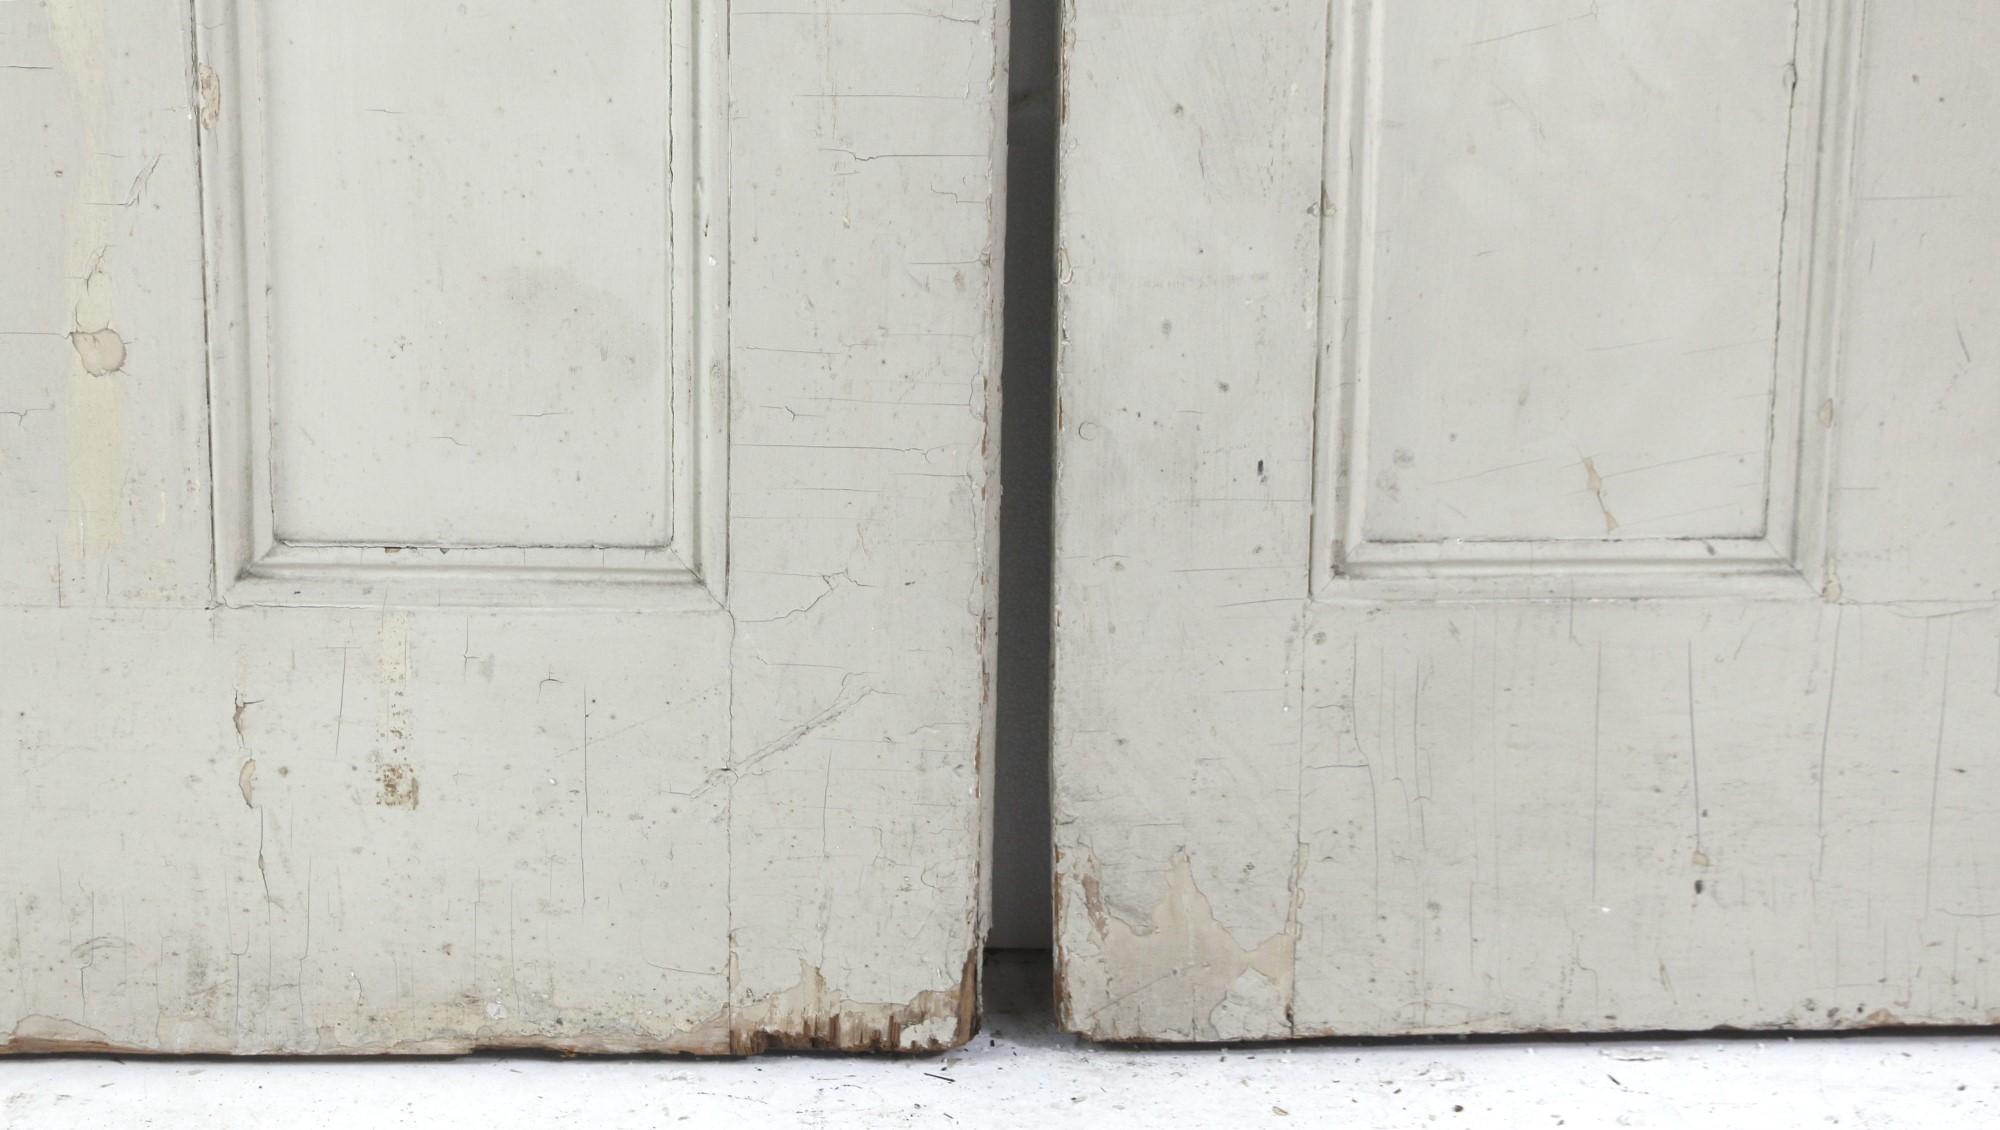 Set of Antique 4 Pane Wood Pocket Doors Painted White Vertical Panels For Sale 2